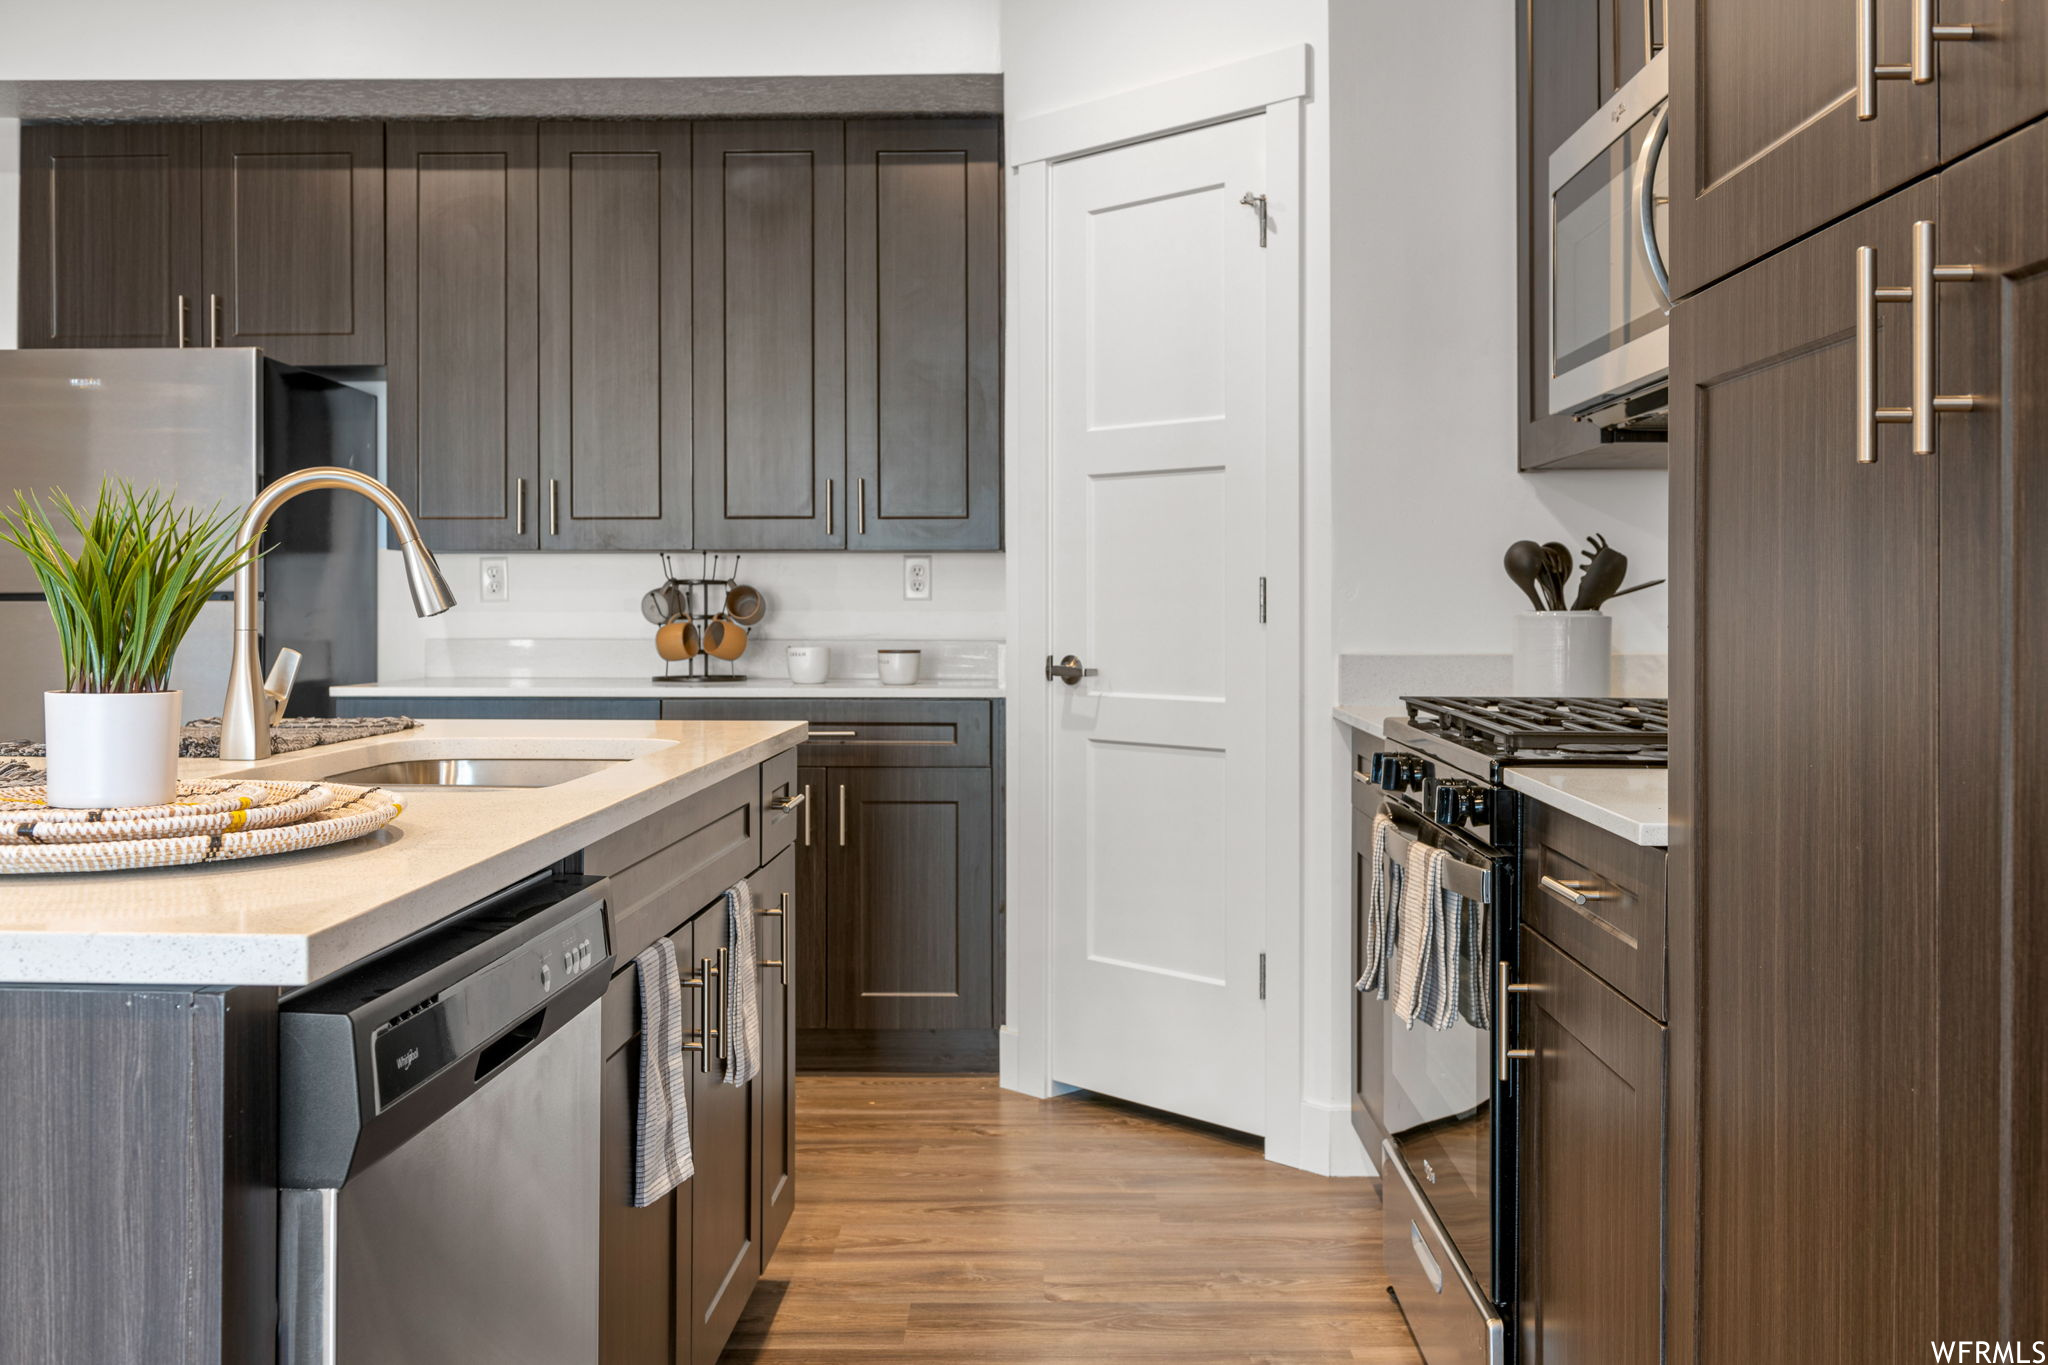 Kitchen featuring dark brown cabinetry, appliances with stainless steel finishes, light countertops, and light hardwood flooring